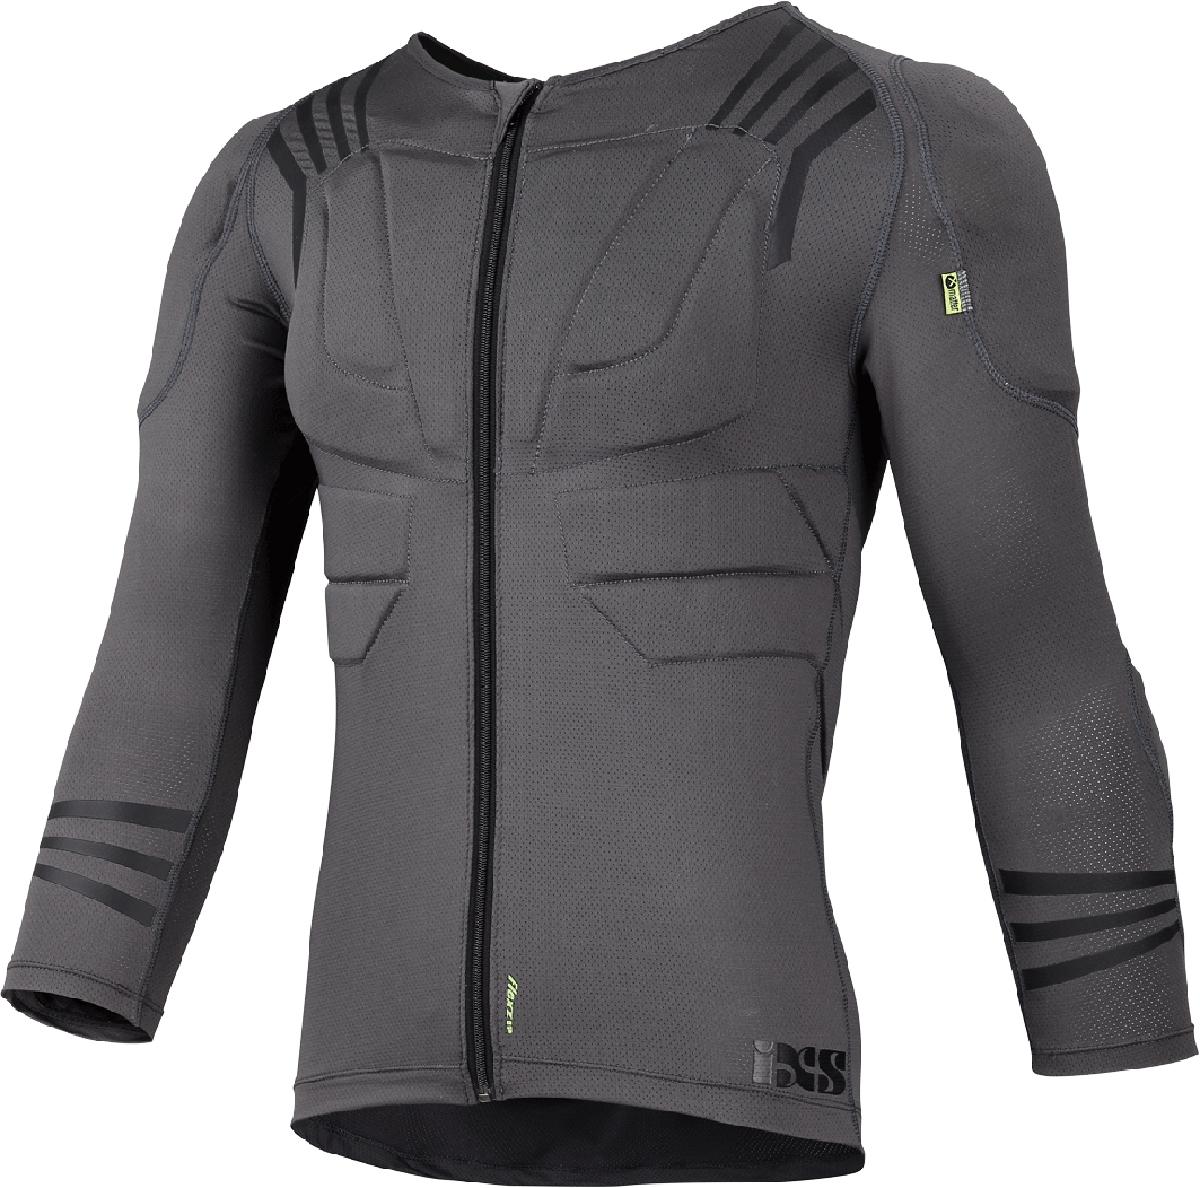 Ixs Trigger Upper Body Protection  Grey